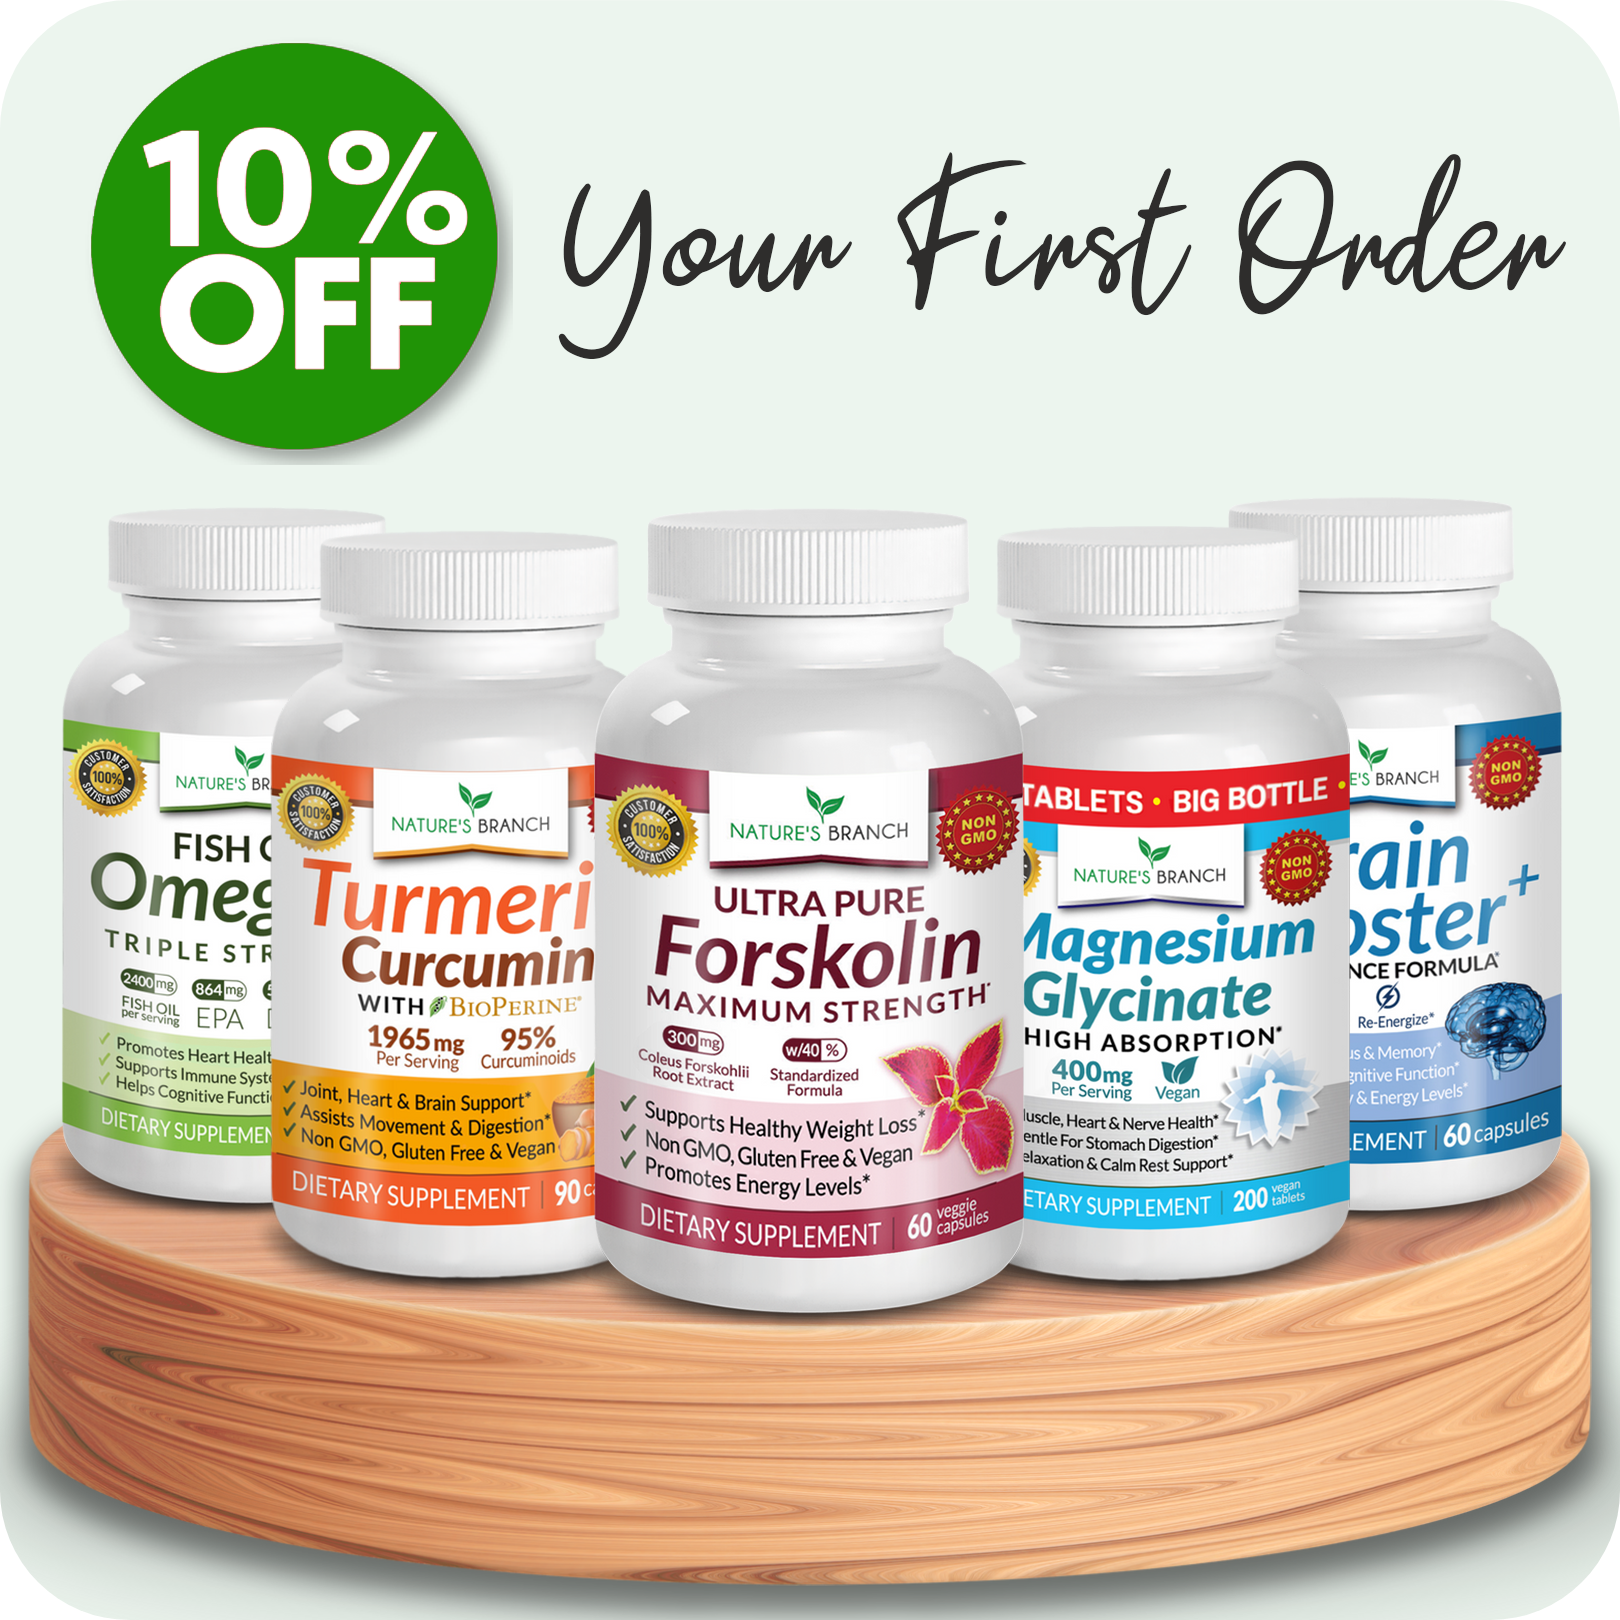 Nature's Branch nutritional supplement bottles on a platform showing 10% off your first purchase offer